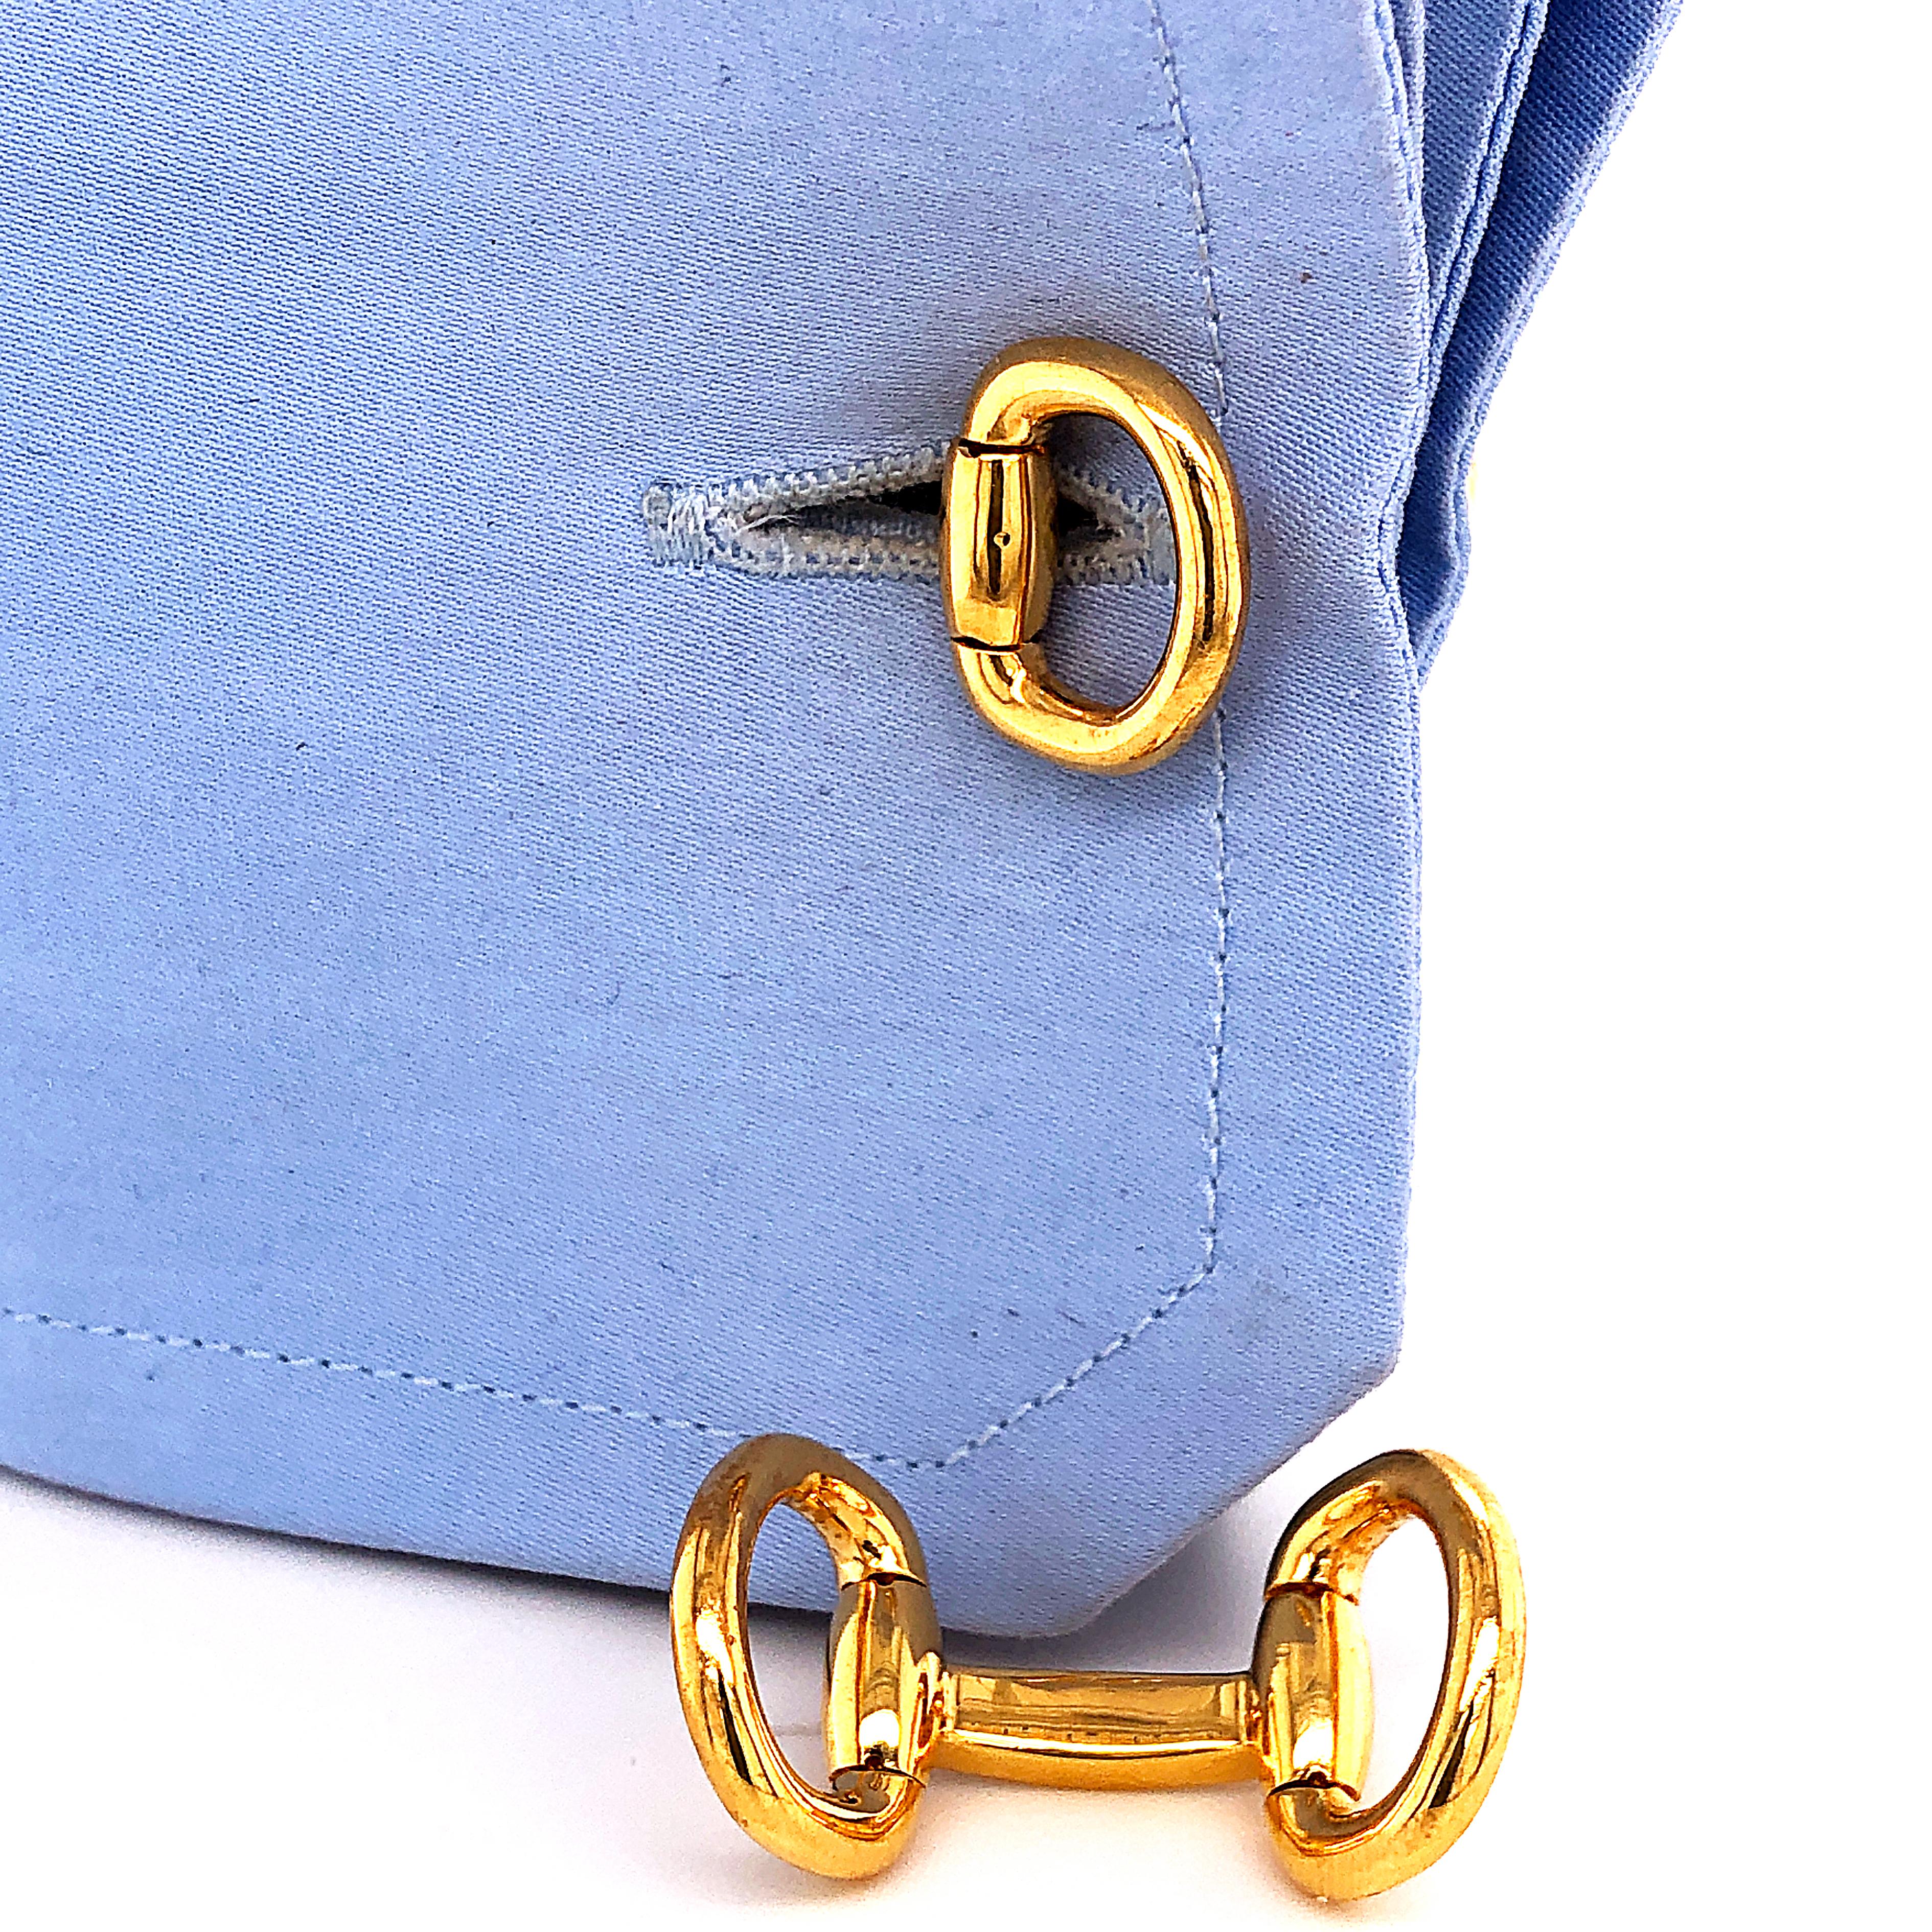 Contemporary Berca Gold-Plated Solid Sterling Silver Stirrup Shaped Cufflinks